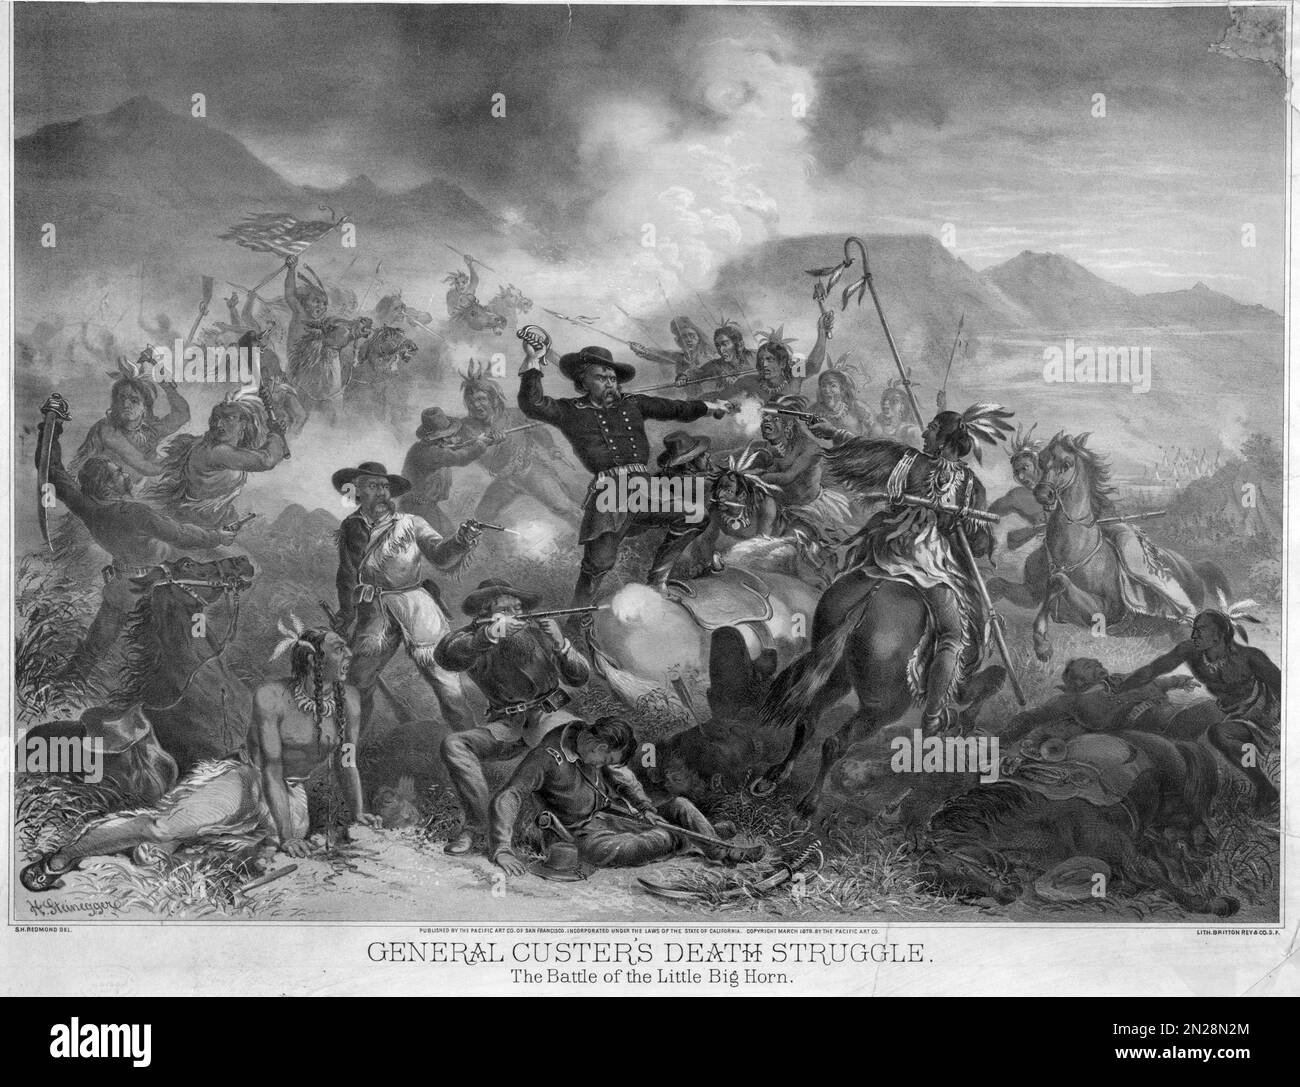 An illustration of Custer's Last Stand. A portrait of General George Custer who was killed and his entire force killed by the combined forces of the Lakota Sioux, Northern Cheyenne, and Arapaho tribes  at the Battle of Little Bighorn during the Great Sioux Wars of 1876. Stock Photo